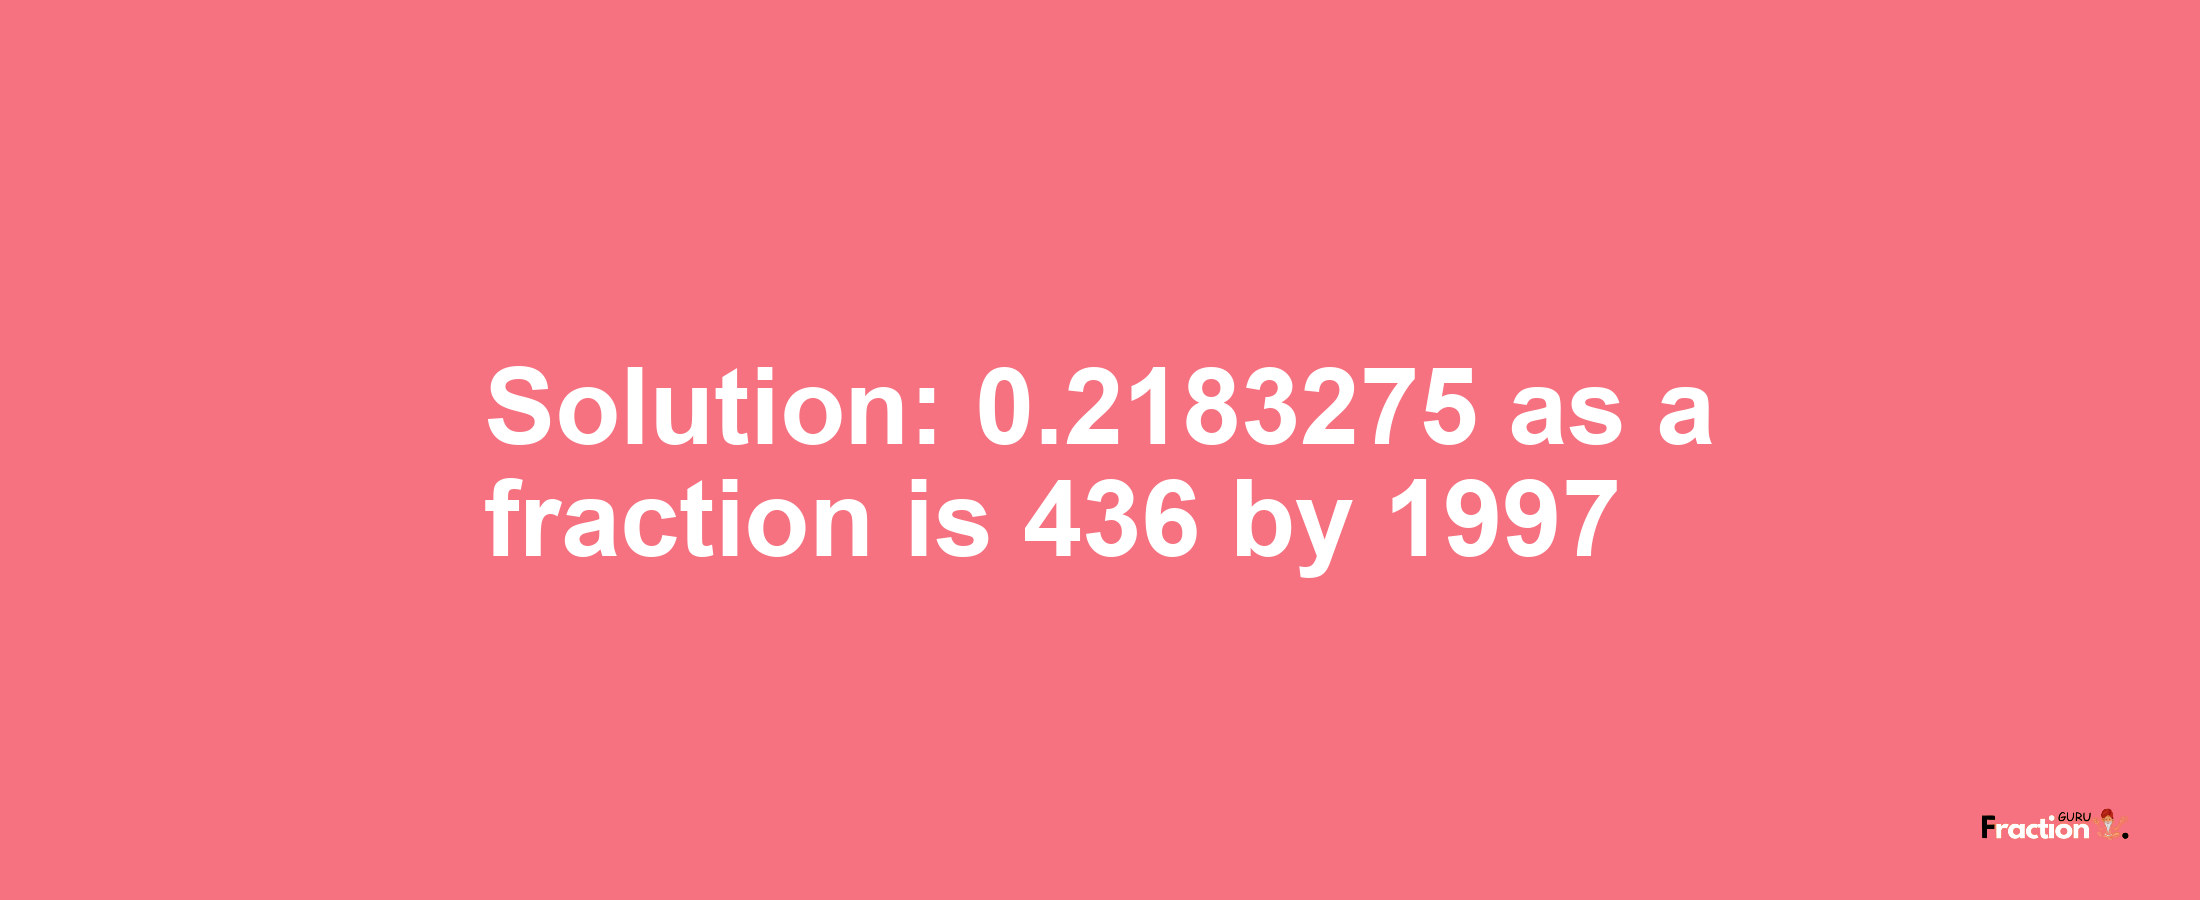 Solution:0.2183275 as a fraction is 436/1997